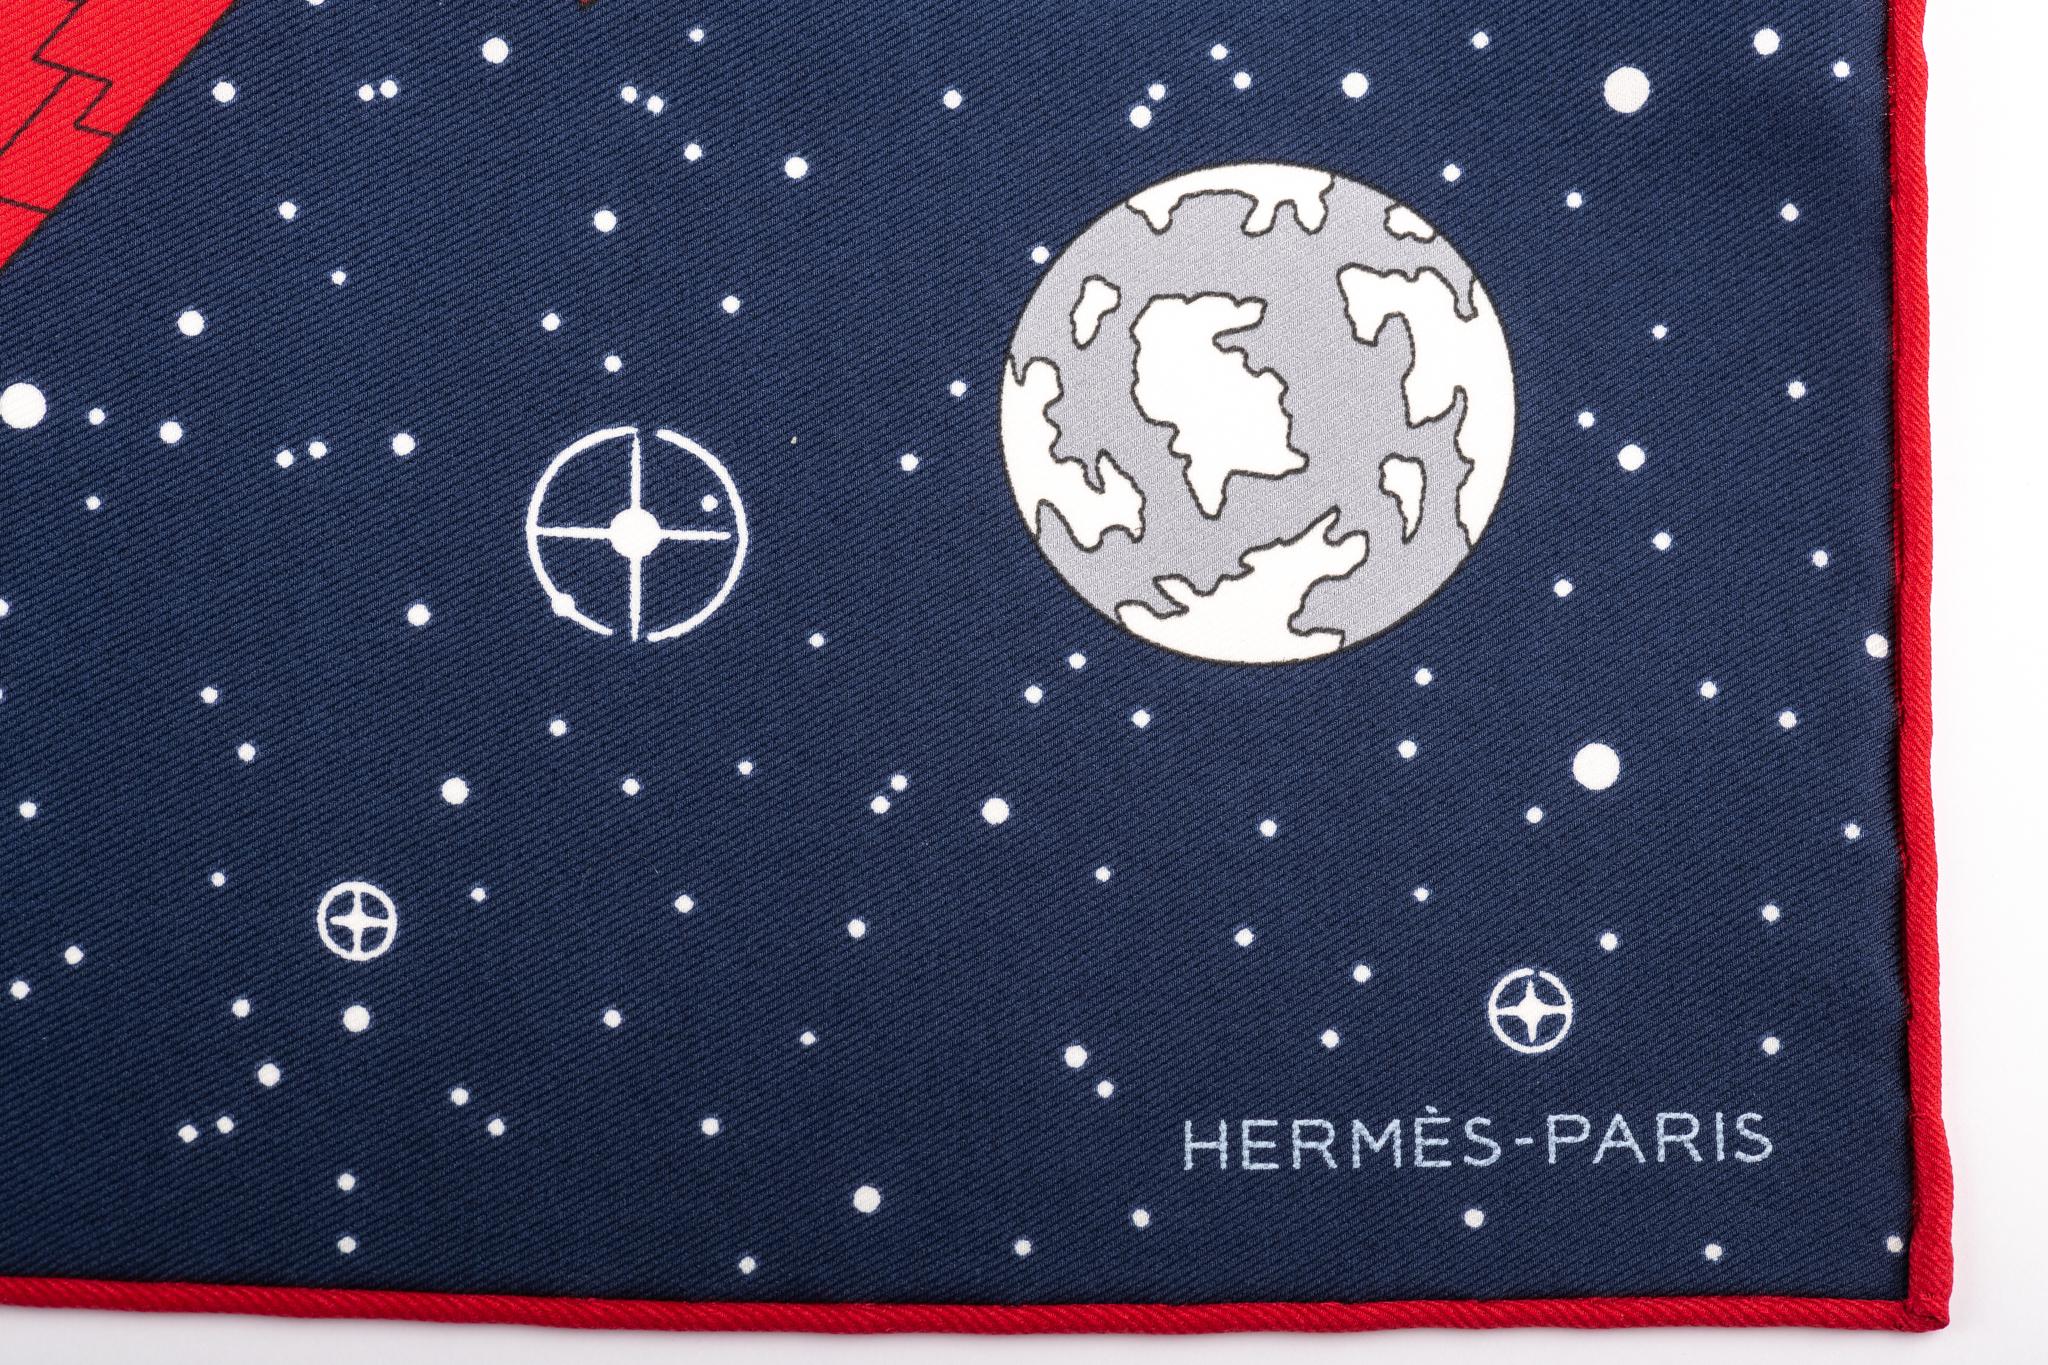 Hermès blue, grey and red silk gavroche with hand-rolled edges. Spaceship limited edition. New in box.